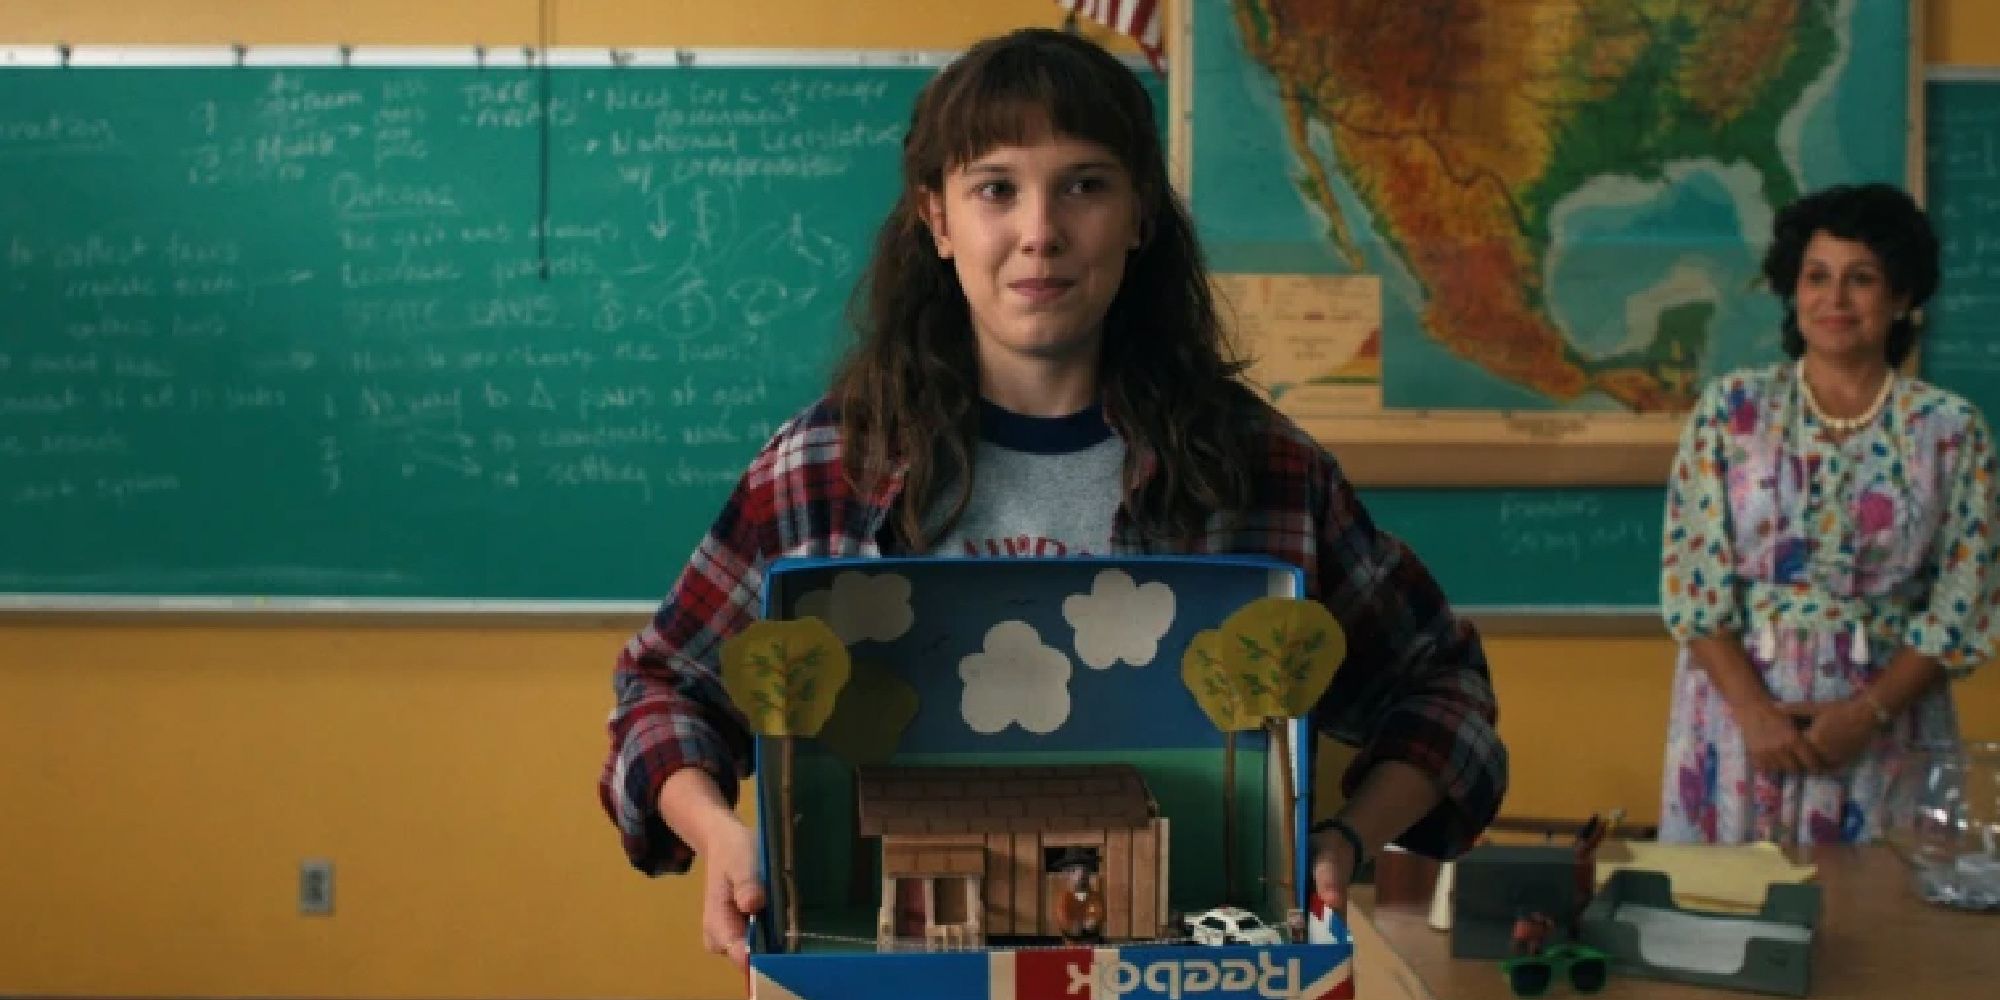 Eleven showing the class her diorama in Stranger Things season 4